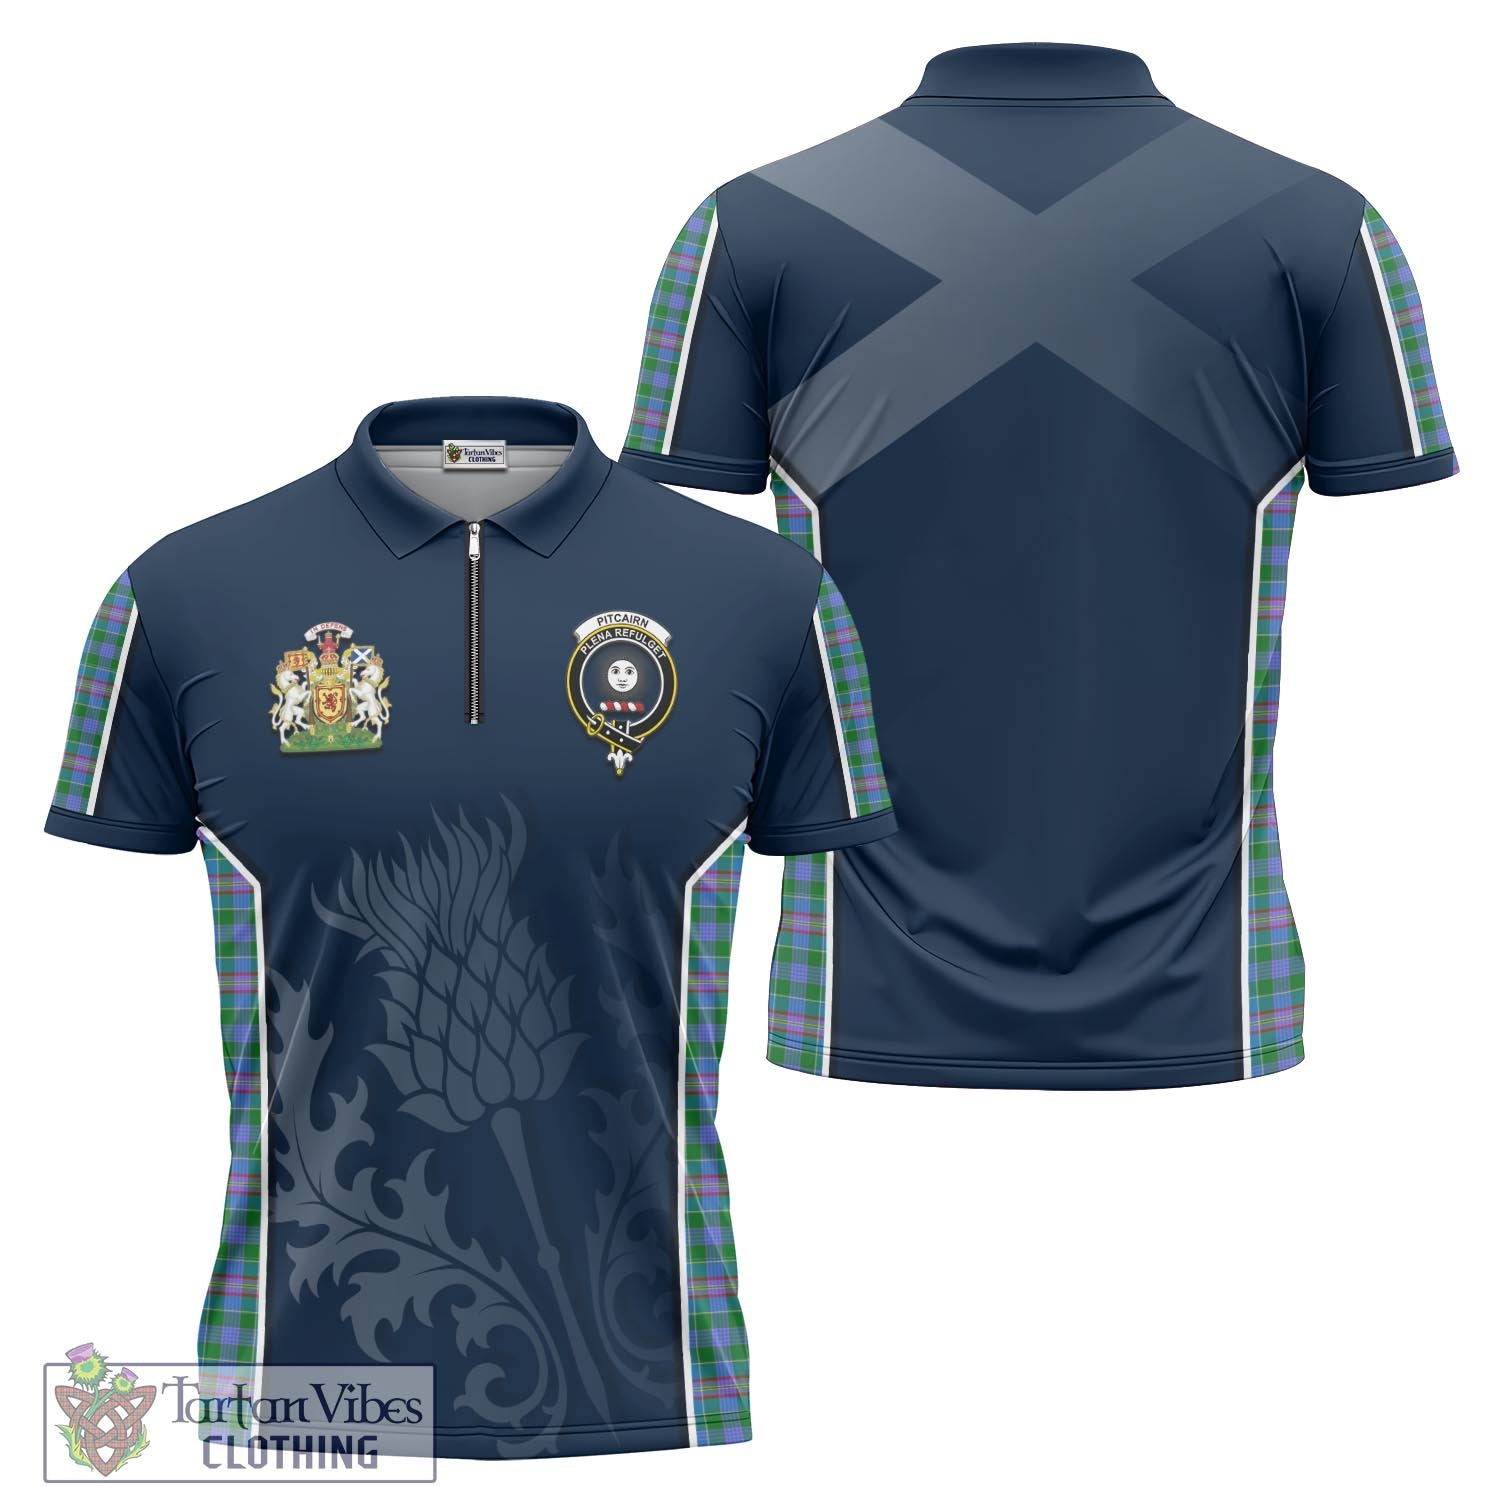 Tartan Vibes Clothing Pitcairn Hunting Tartan Zipper Polo Shirt with Family Crest and Scottish Thistle Vibes Sport Style